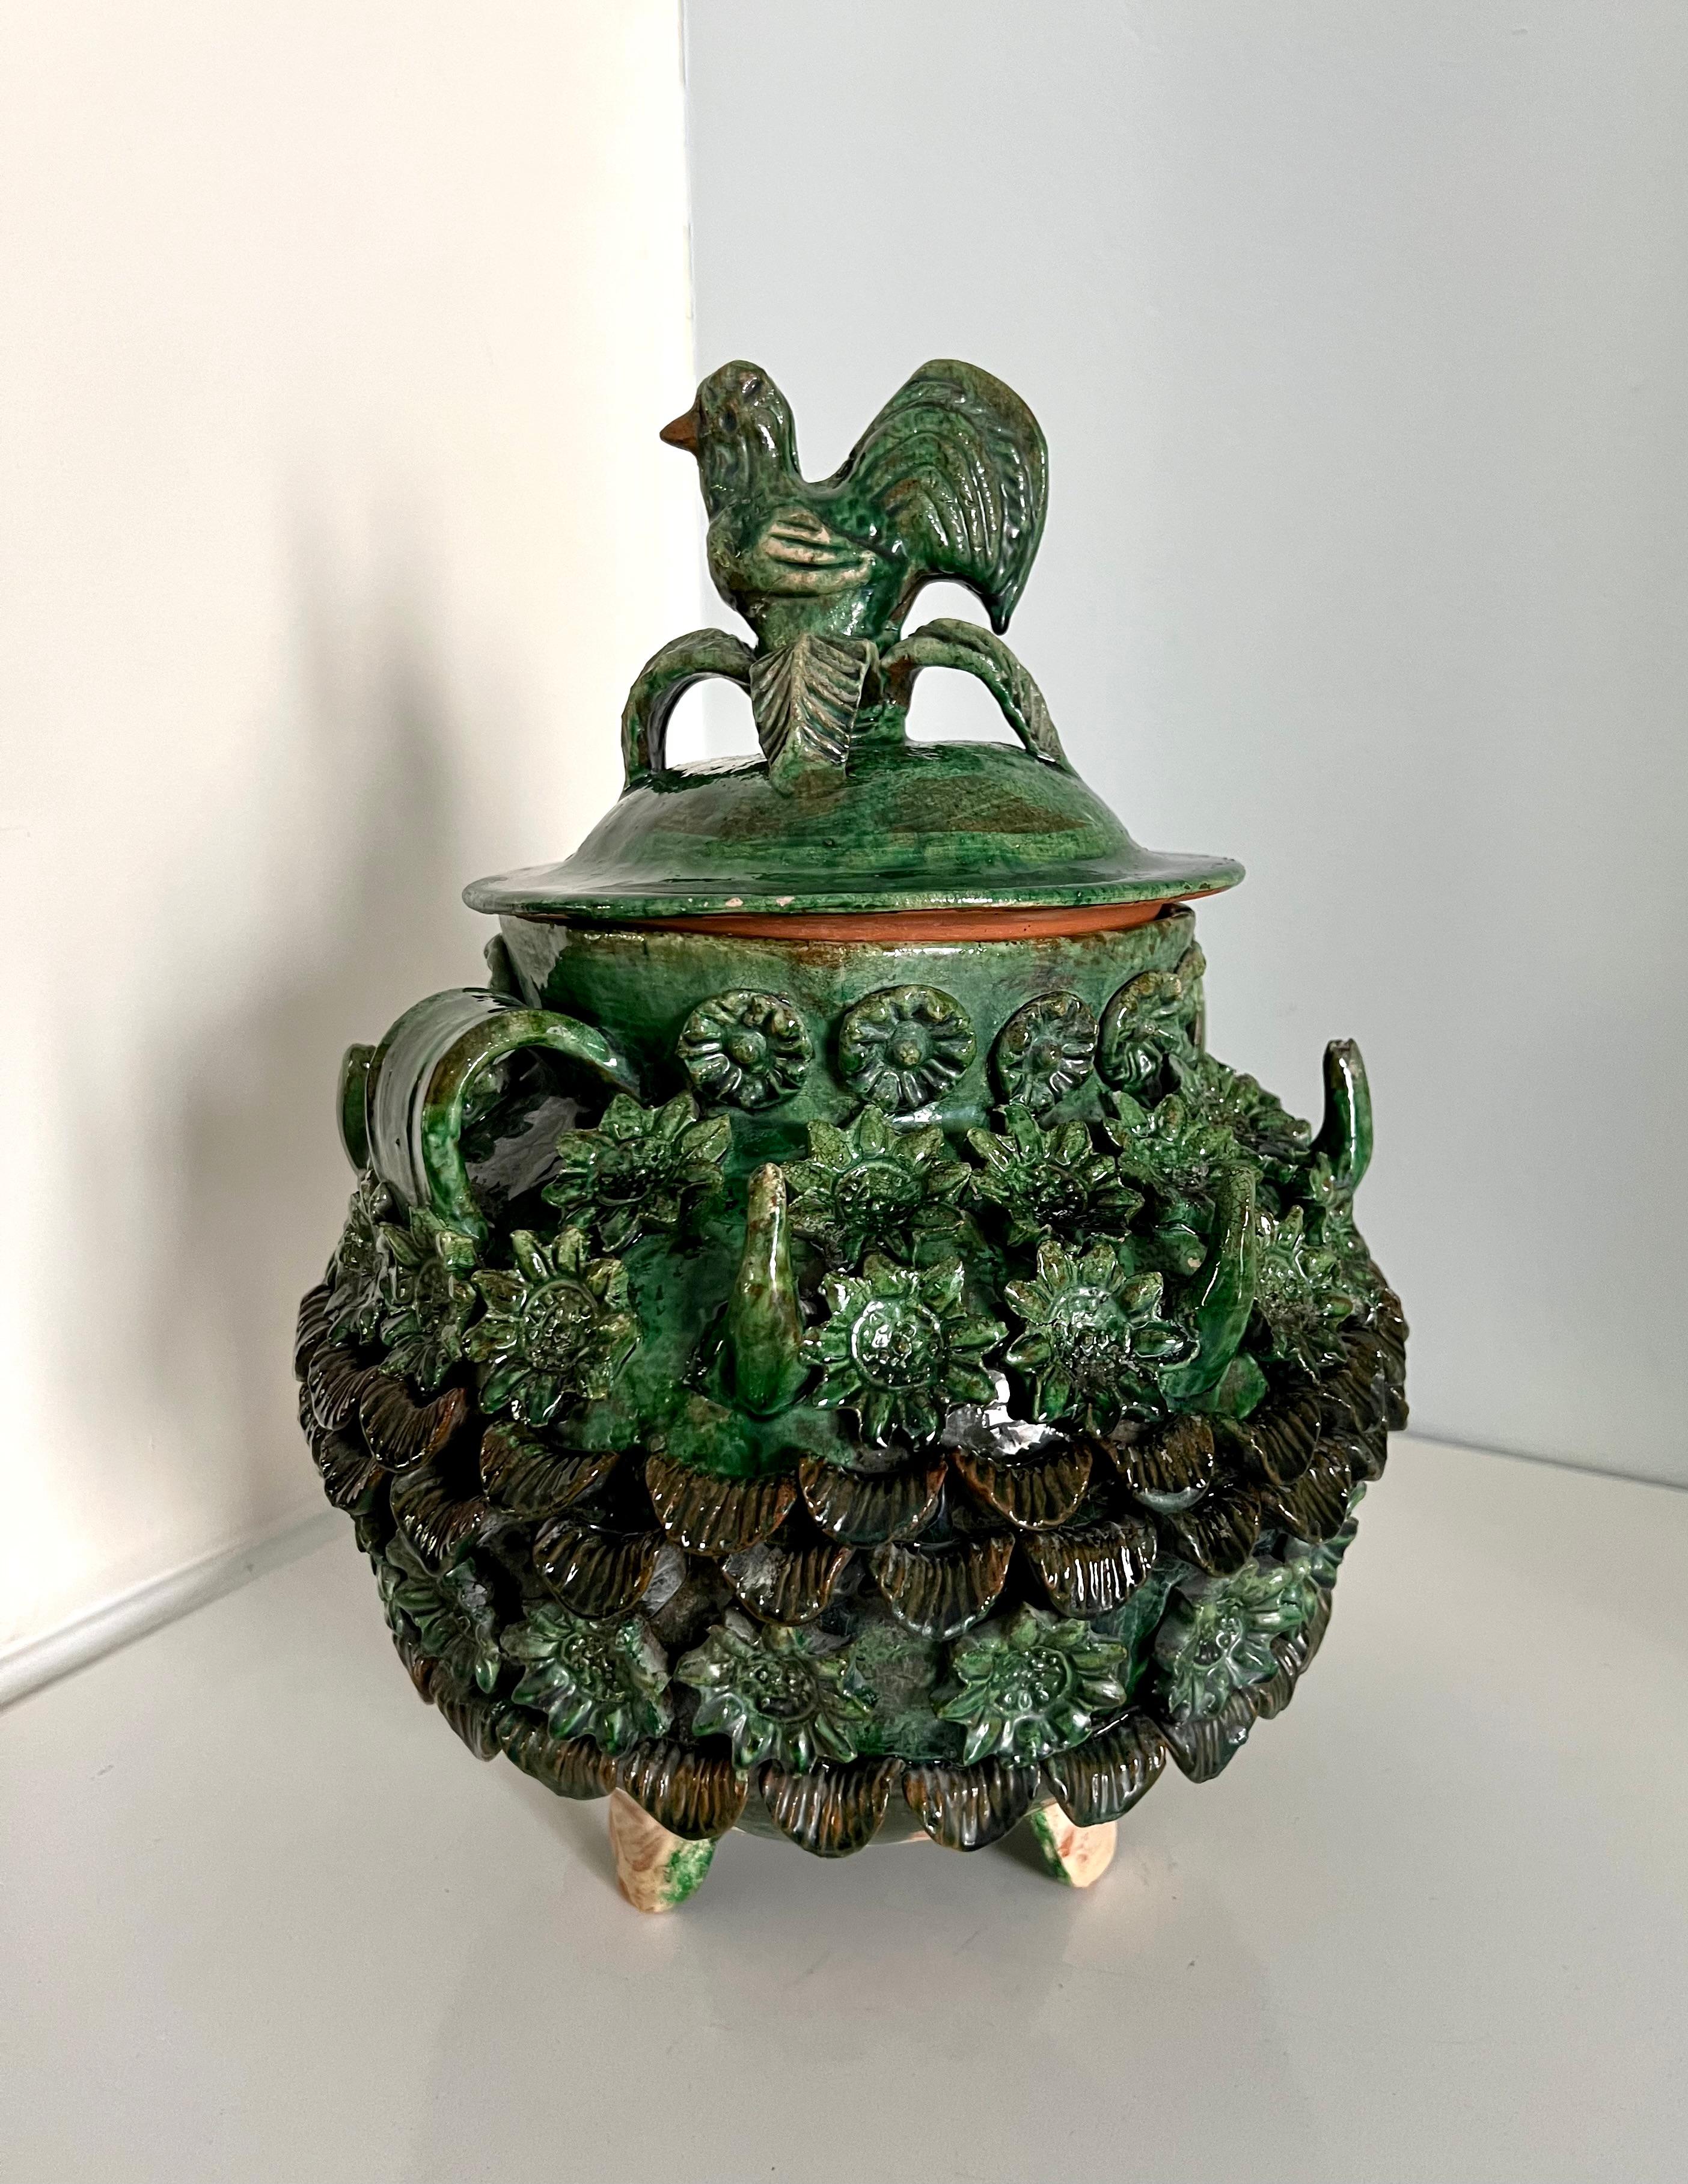 Terracotta Glazed Majolica Lidded Jar Container with Flowers and Rooster on Legs